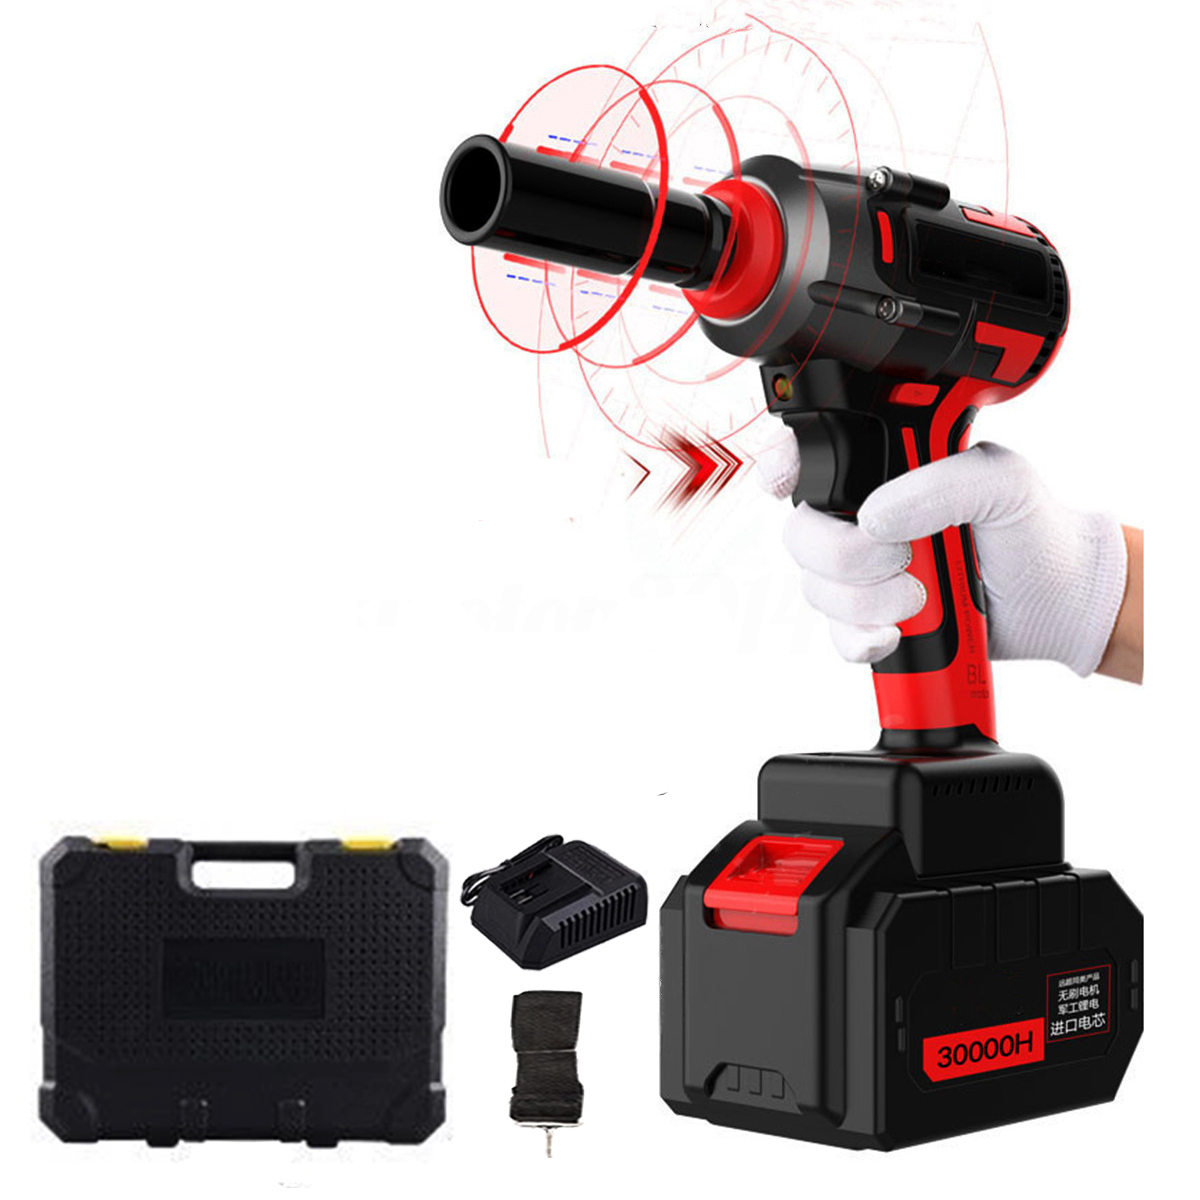 

20V 500N.m Electric Brushess Impact Wrench Double Speed Adjustable with 39800mAh Li-ion Batteries